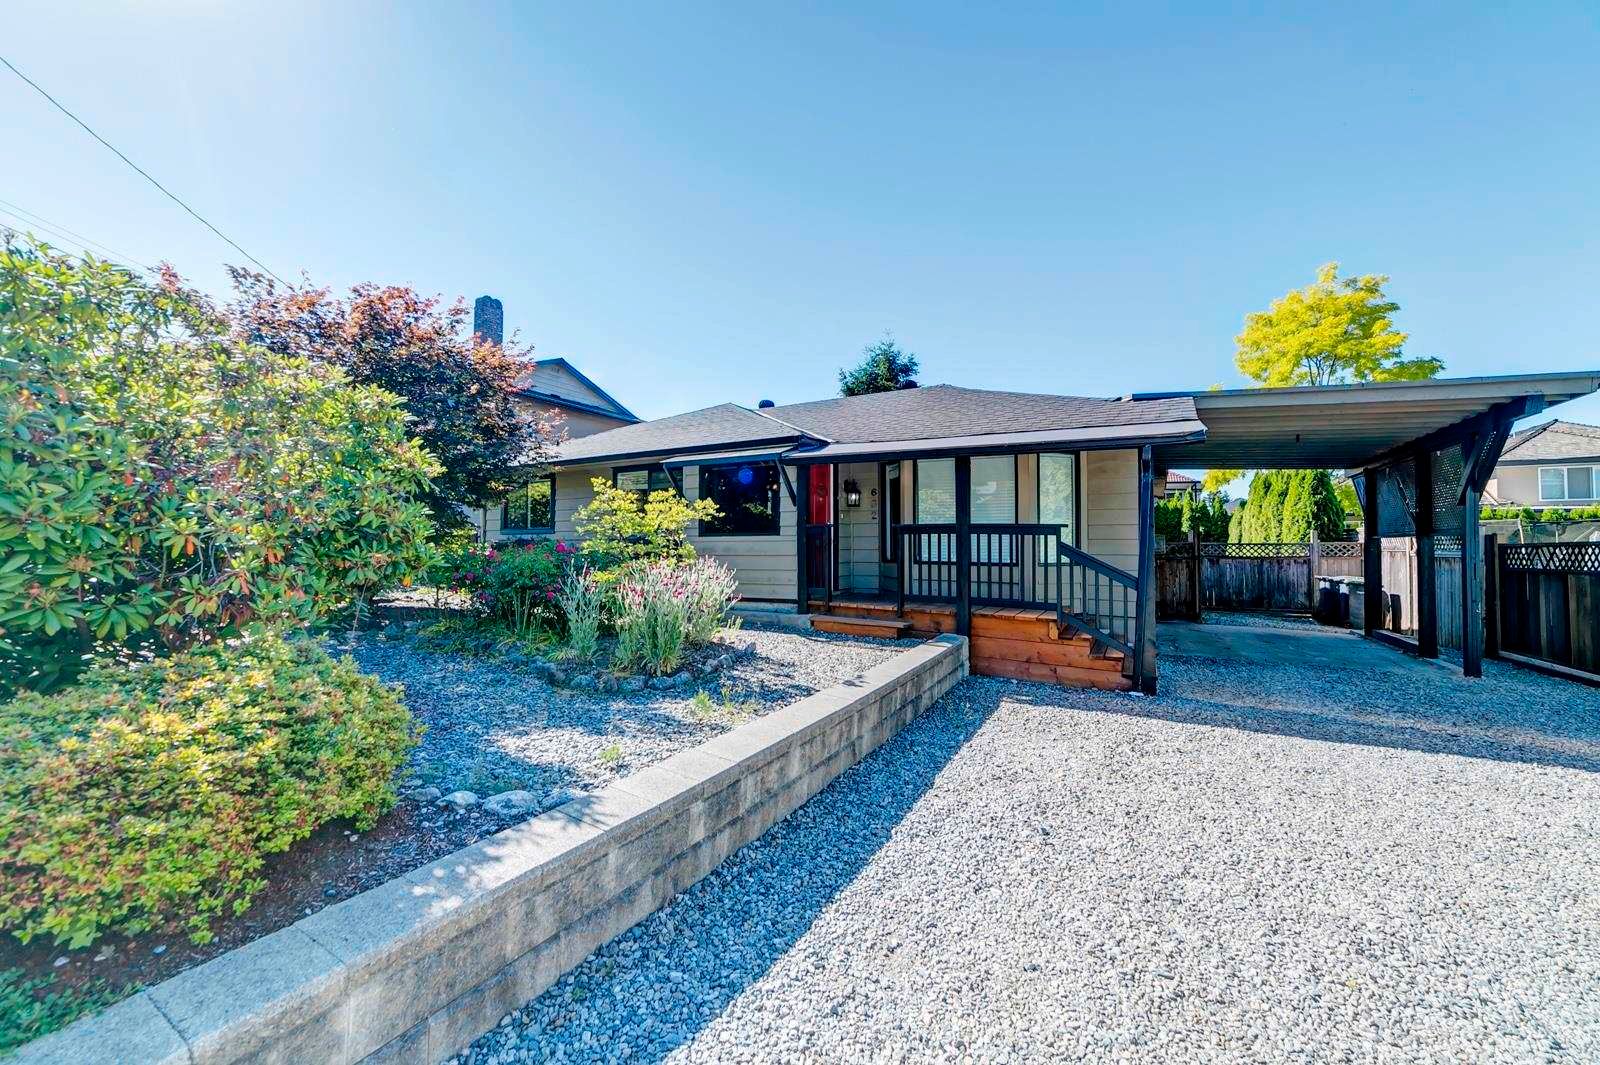 Main Photo: 632 CHAPMAN Avenue in Coquitlam: Coquitlam West House for sale : MLS®# R2595703